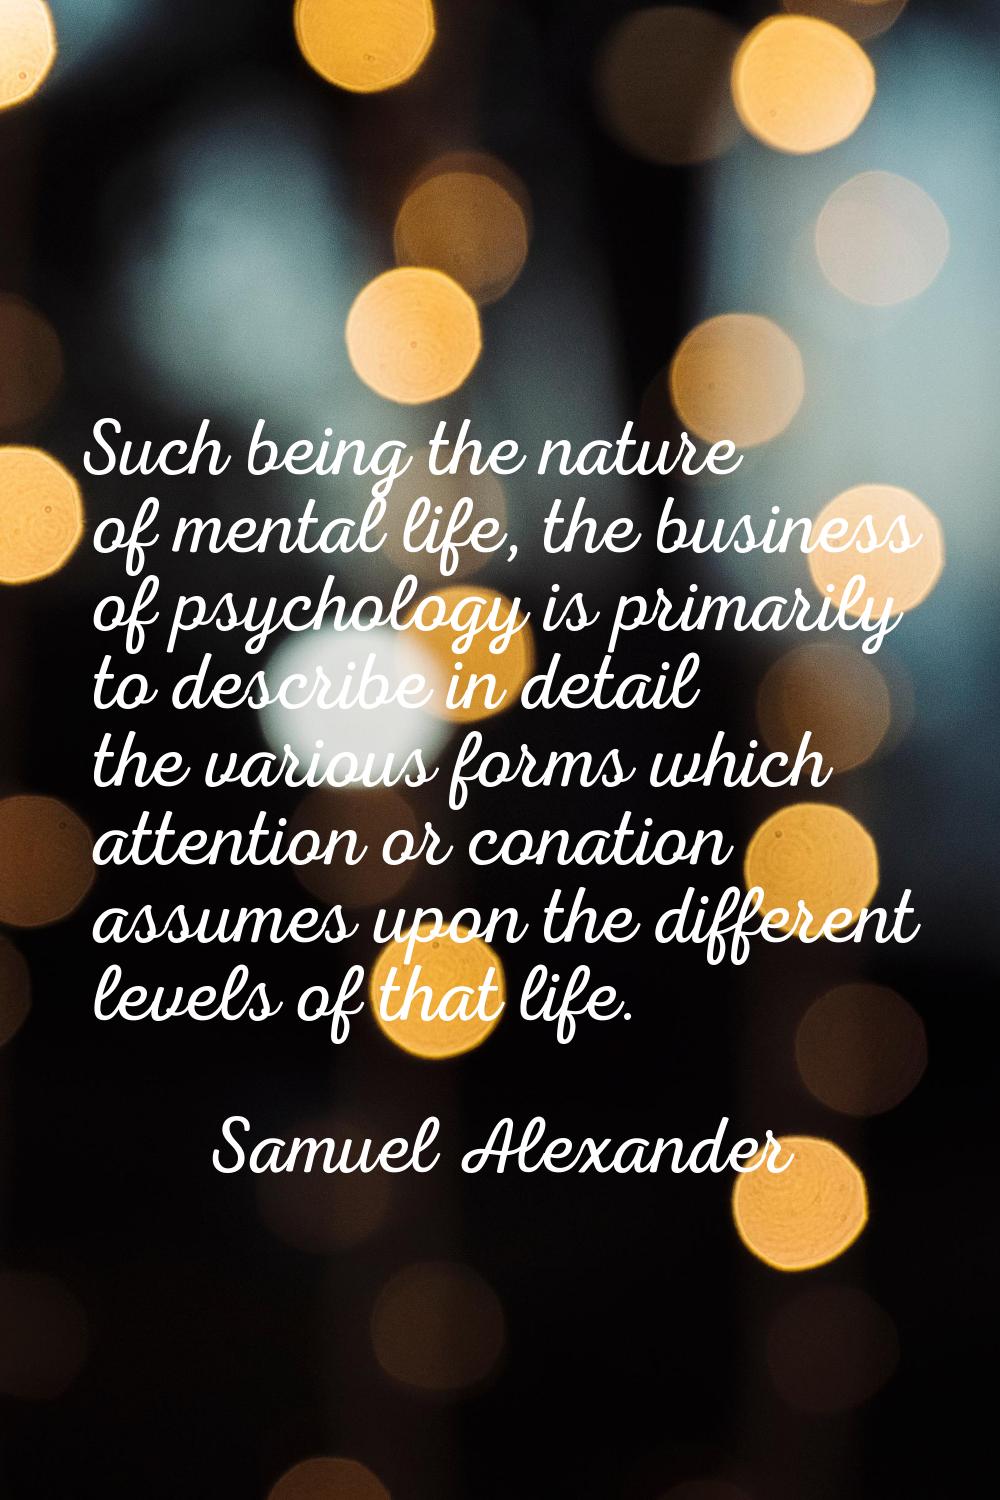 Such being the nature of mental life, the business of psychology is primarily to describe in detail